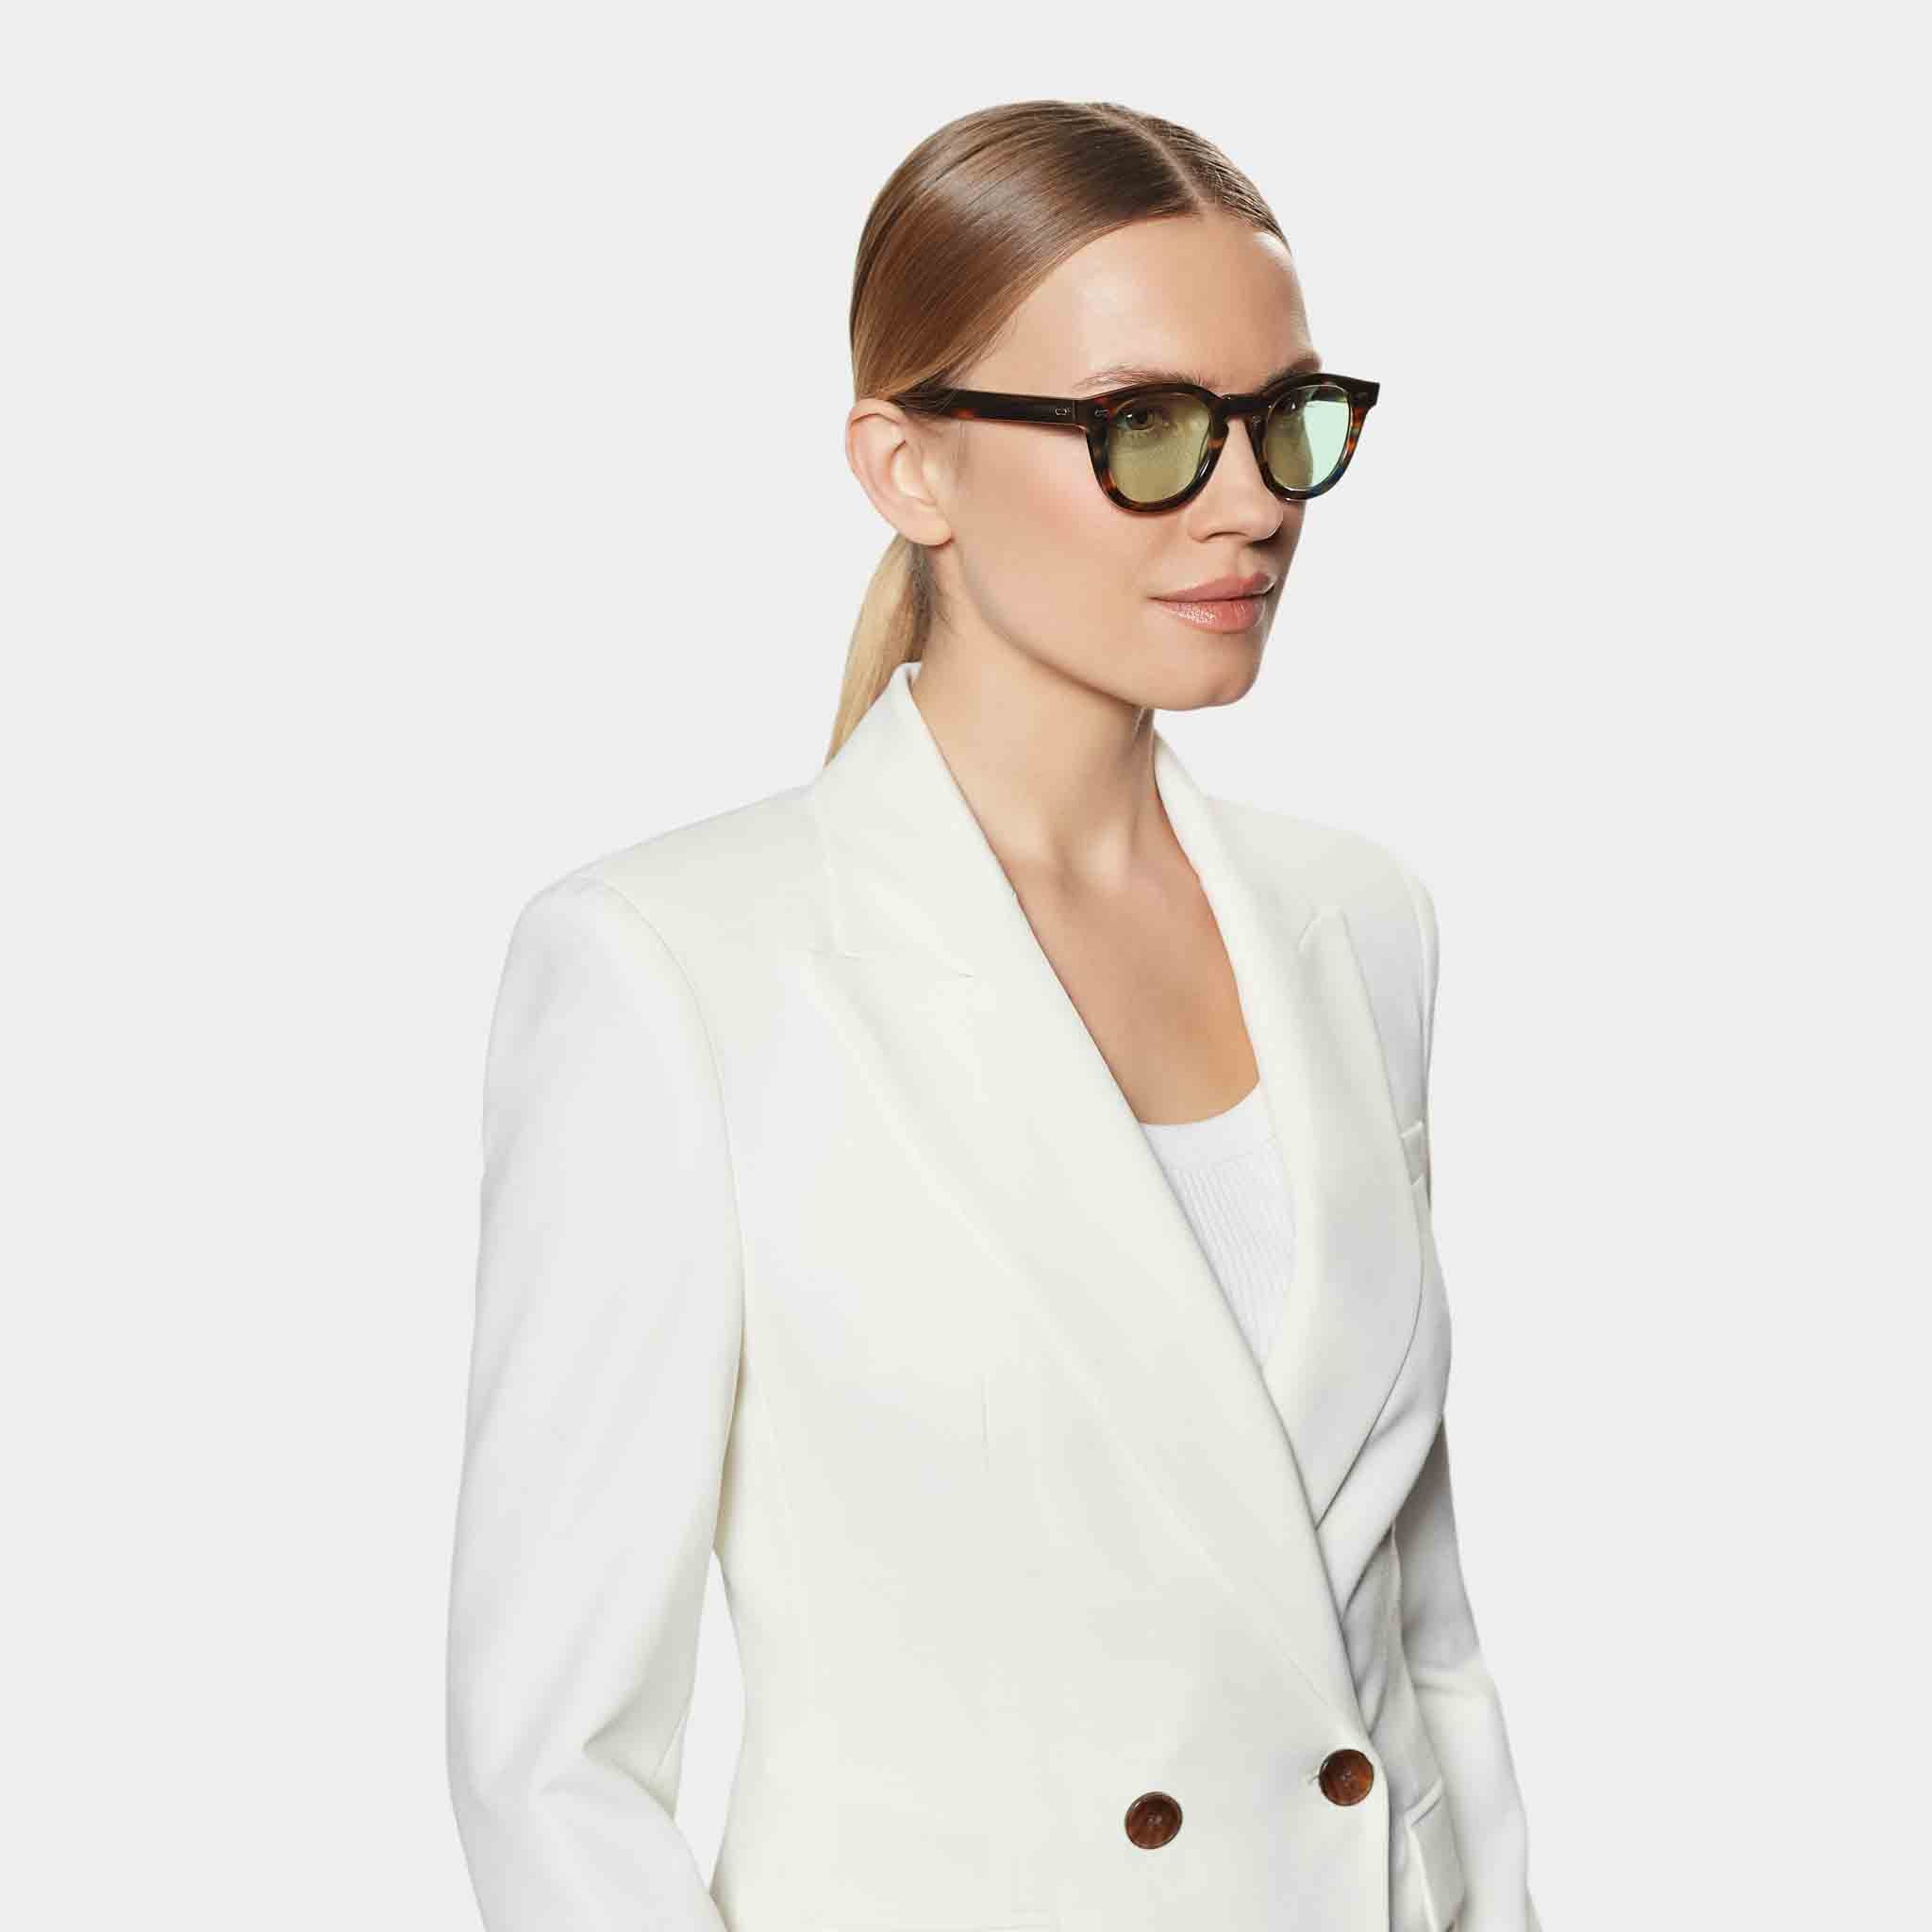 sunglasses-donegal-river-light-green-sustainable-tbd-eyewear-woman